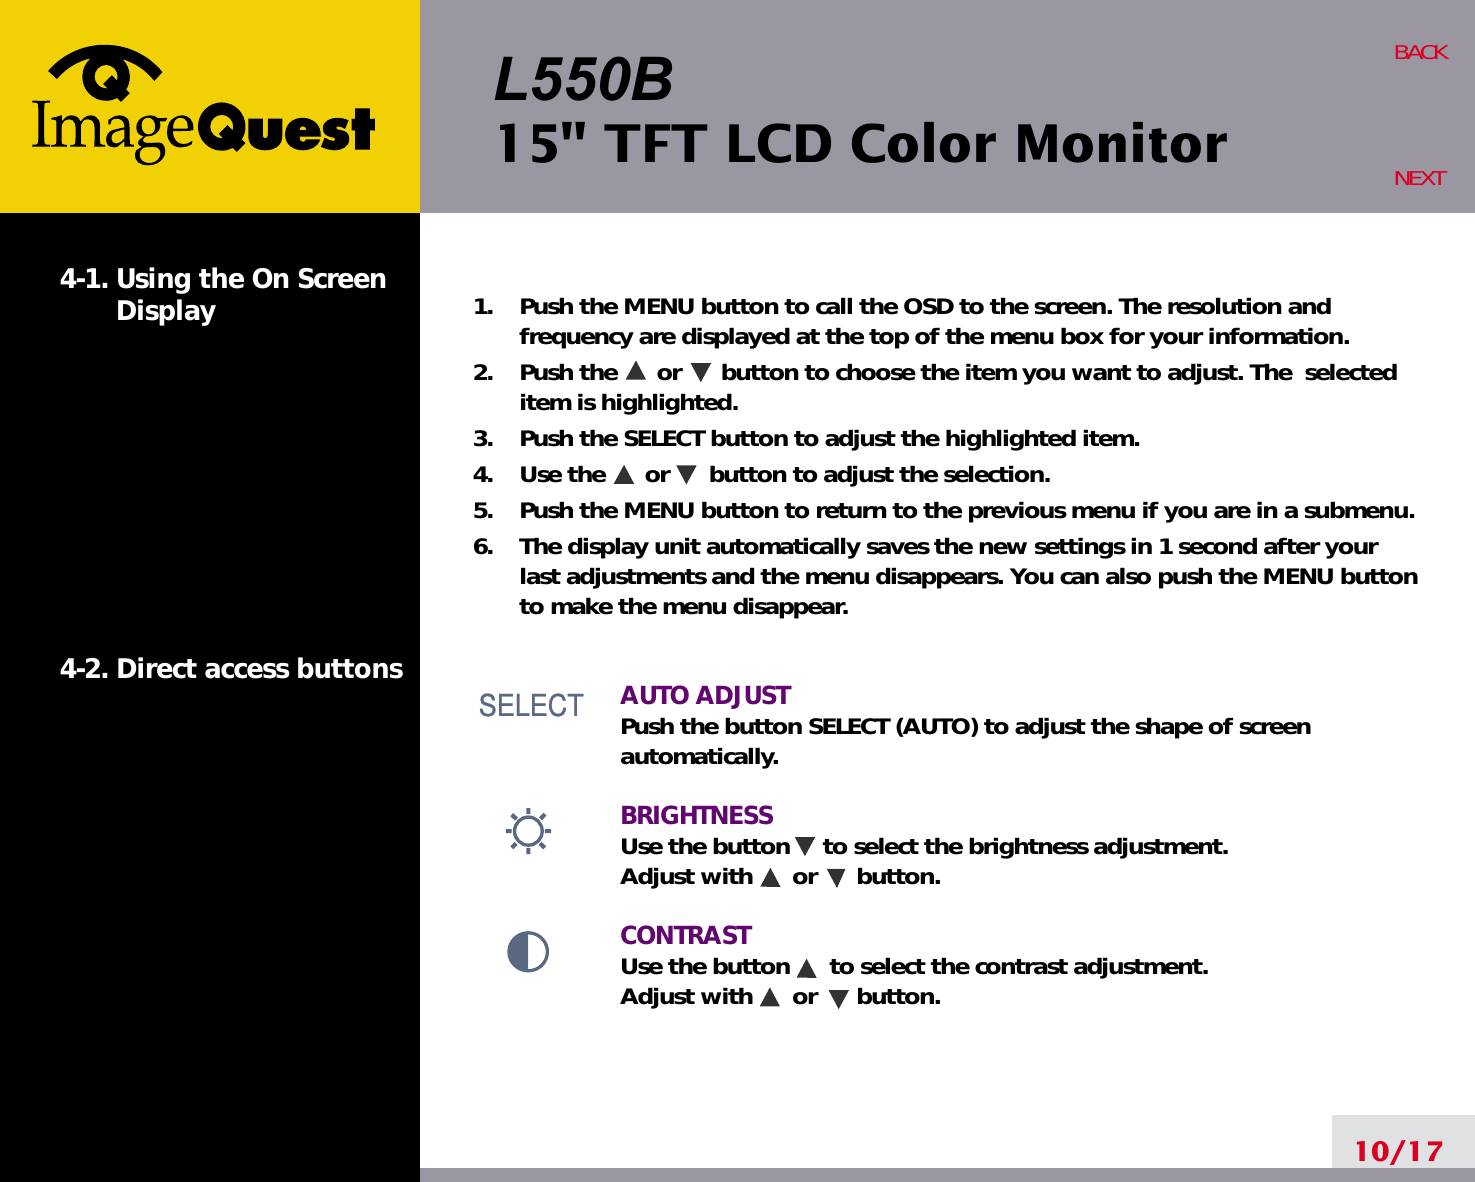 L550B15&quot; TFT LCD Color Monitor10/17BACKNEXT1.    Push the MENU button to call the OSD to the screen. The resolution andfrequency are displayed at the top of the menu box for your information.2.    Push the      or      button to choose the item you want to adjust. The  selecteditem is highlighted.3.    Push the SELECT button to adjust the highlighted item. 4.    Use the      or      button to adjust the selection.5.    Push the MENU button to return to the previous menu if you are in a submenu.6.    The display unit automatically saves the new settings in 1 second after yourlast adjustments and the menu disappears. You can also push the MENU buttonto make the menu disappear.AUTO ADJUSTPush the button SELECT (AUTO) to adjust the shape of screenautomatically.BRIGHTNESS Use the button     to select the brightness adjustment. Adjust with      or      button.CONTRASTUse the button      to select the contrast adjustment. Adjust with      or      button.4-1. Using the On ScreenDisplay 4-2. Direct access buttonsSELECTSELECTSELECT